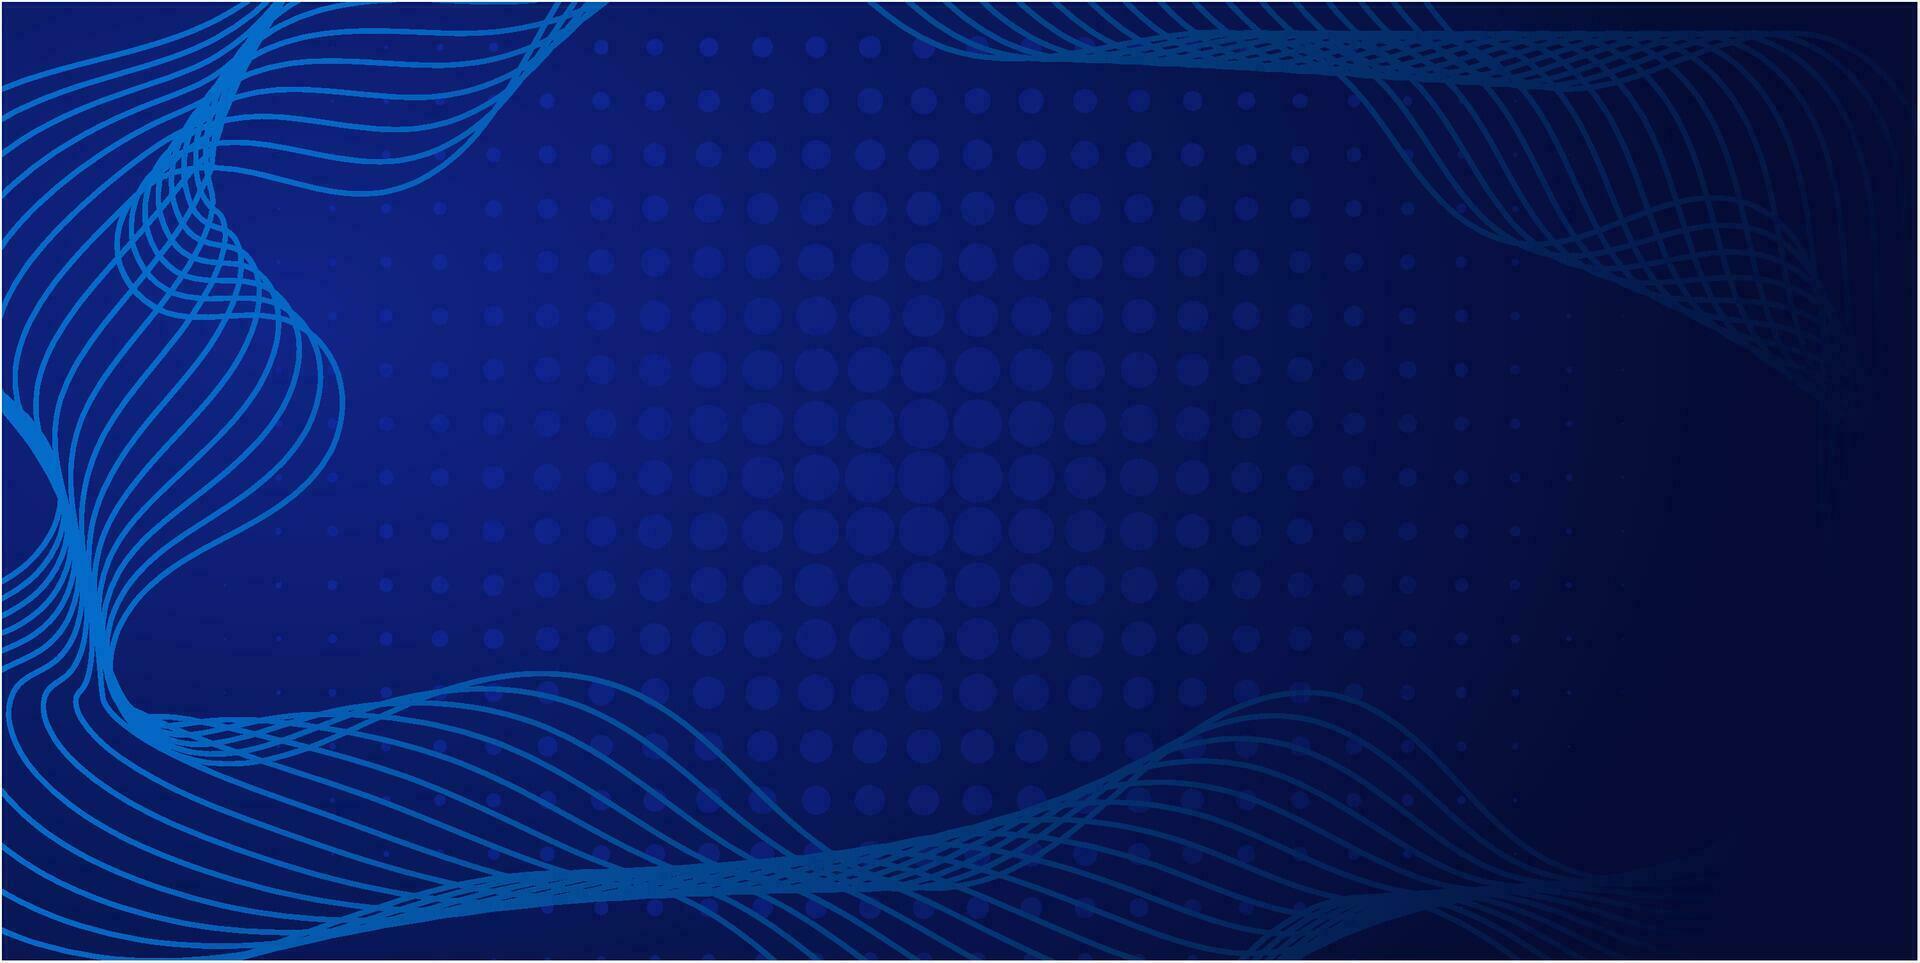 modern dark blue background with lines and dots vector